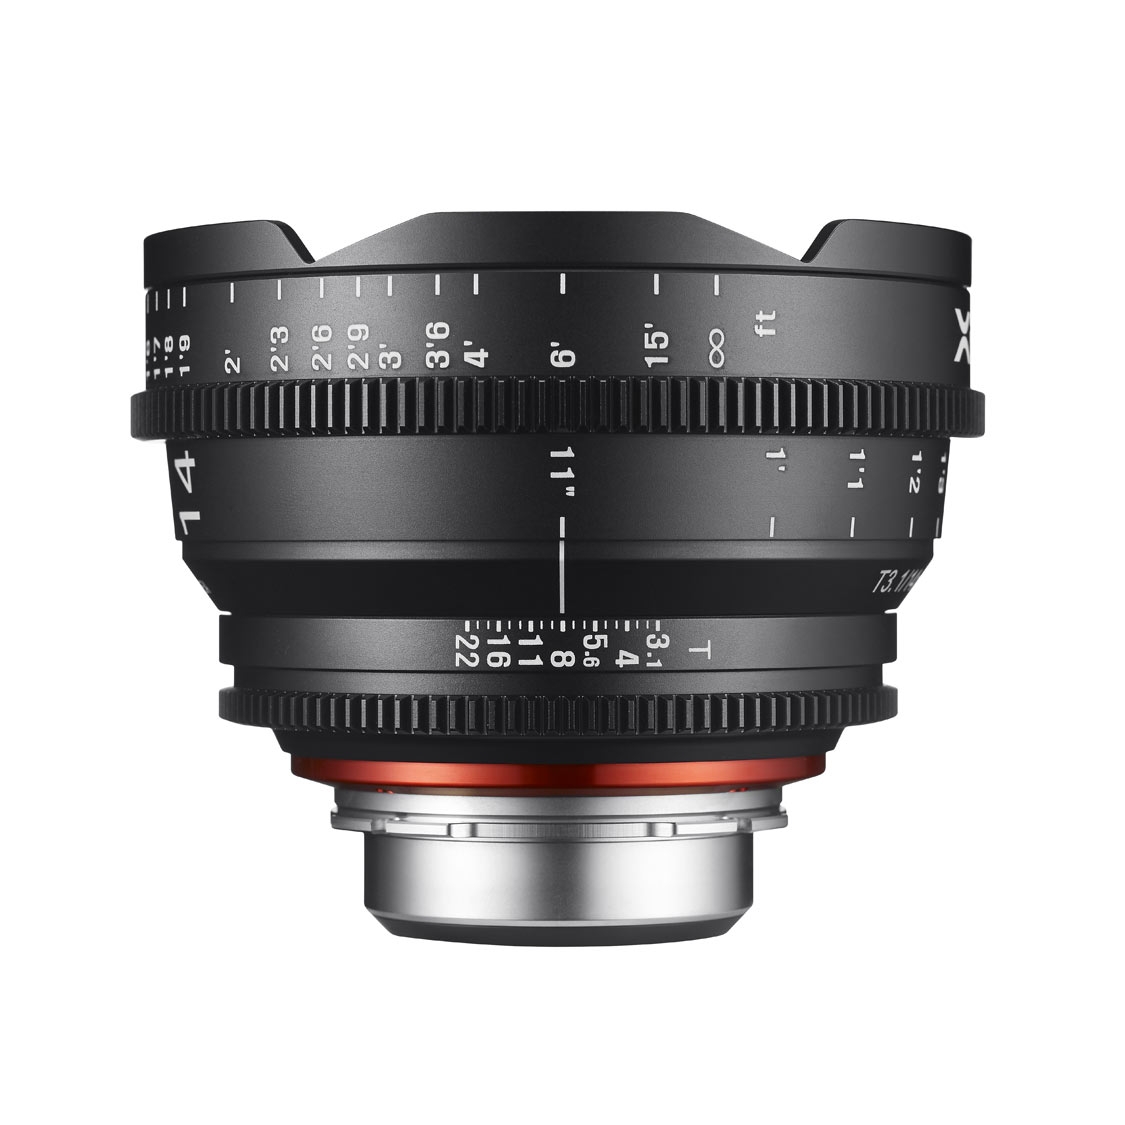 Rokinon 14mm T3.1 Xeen Professional Cine Lens for Micro 4/3 Mount